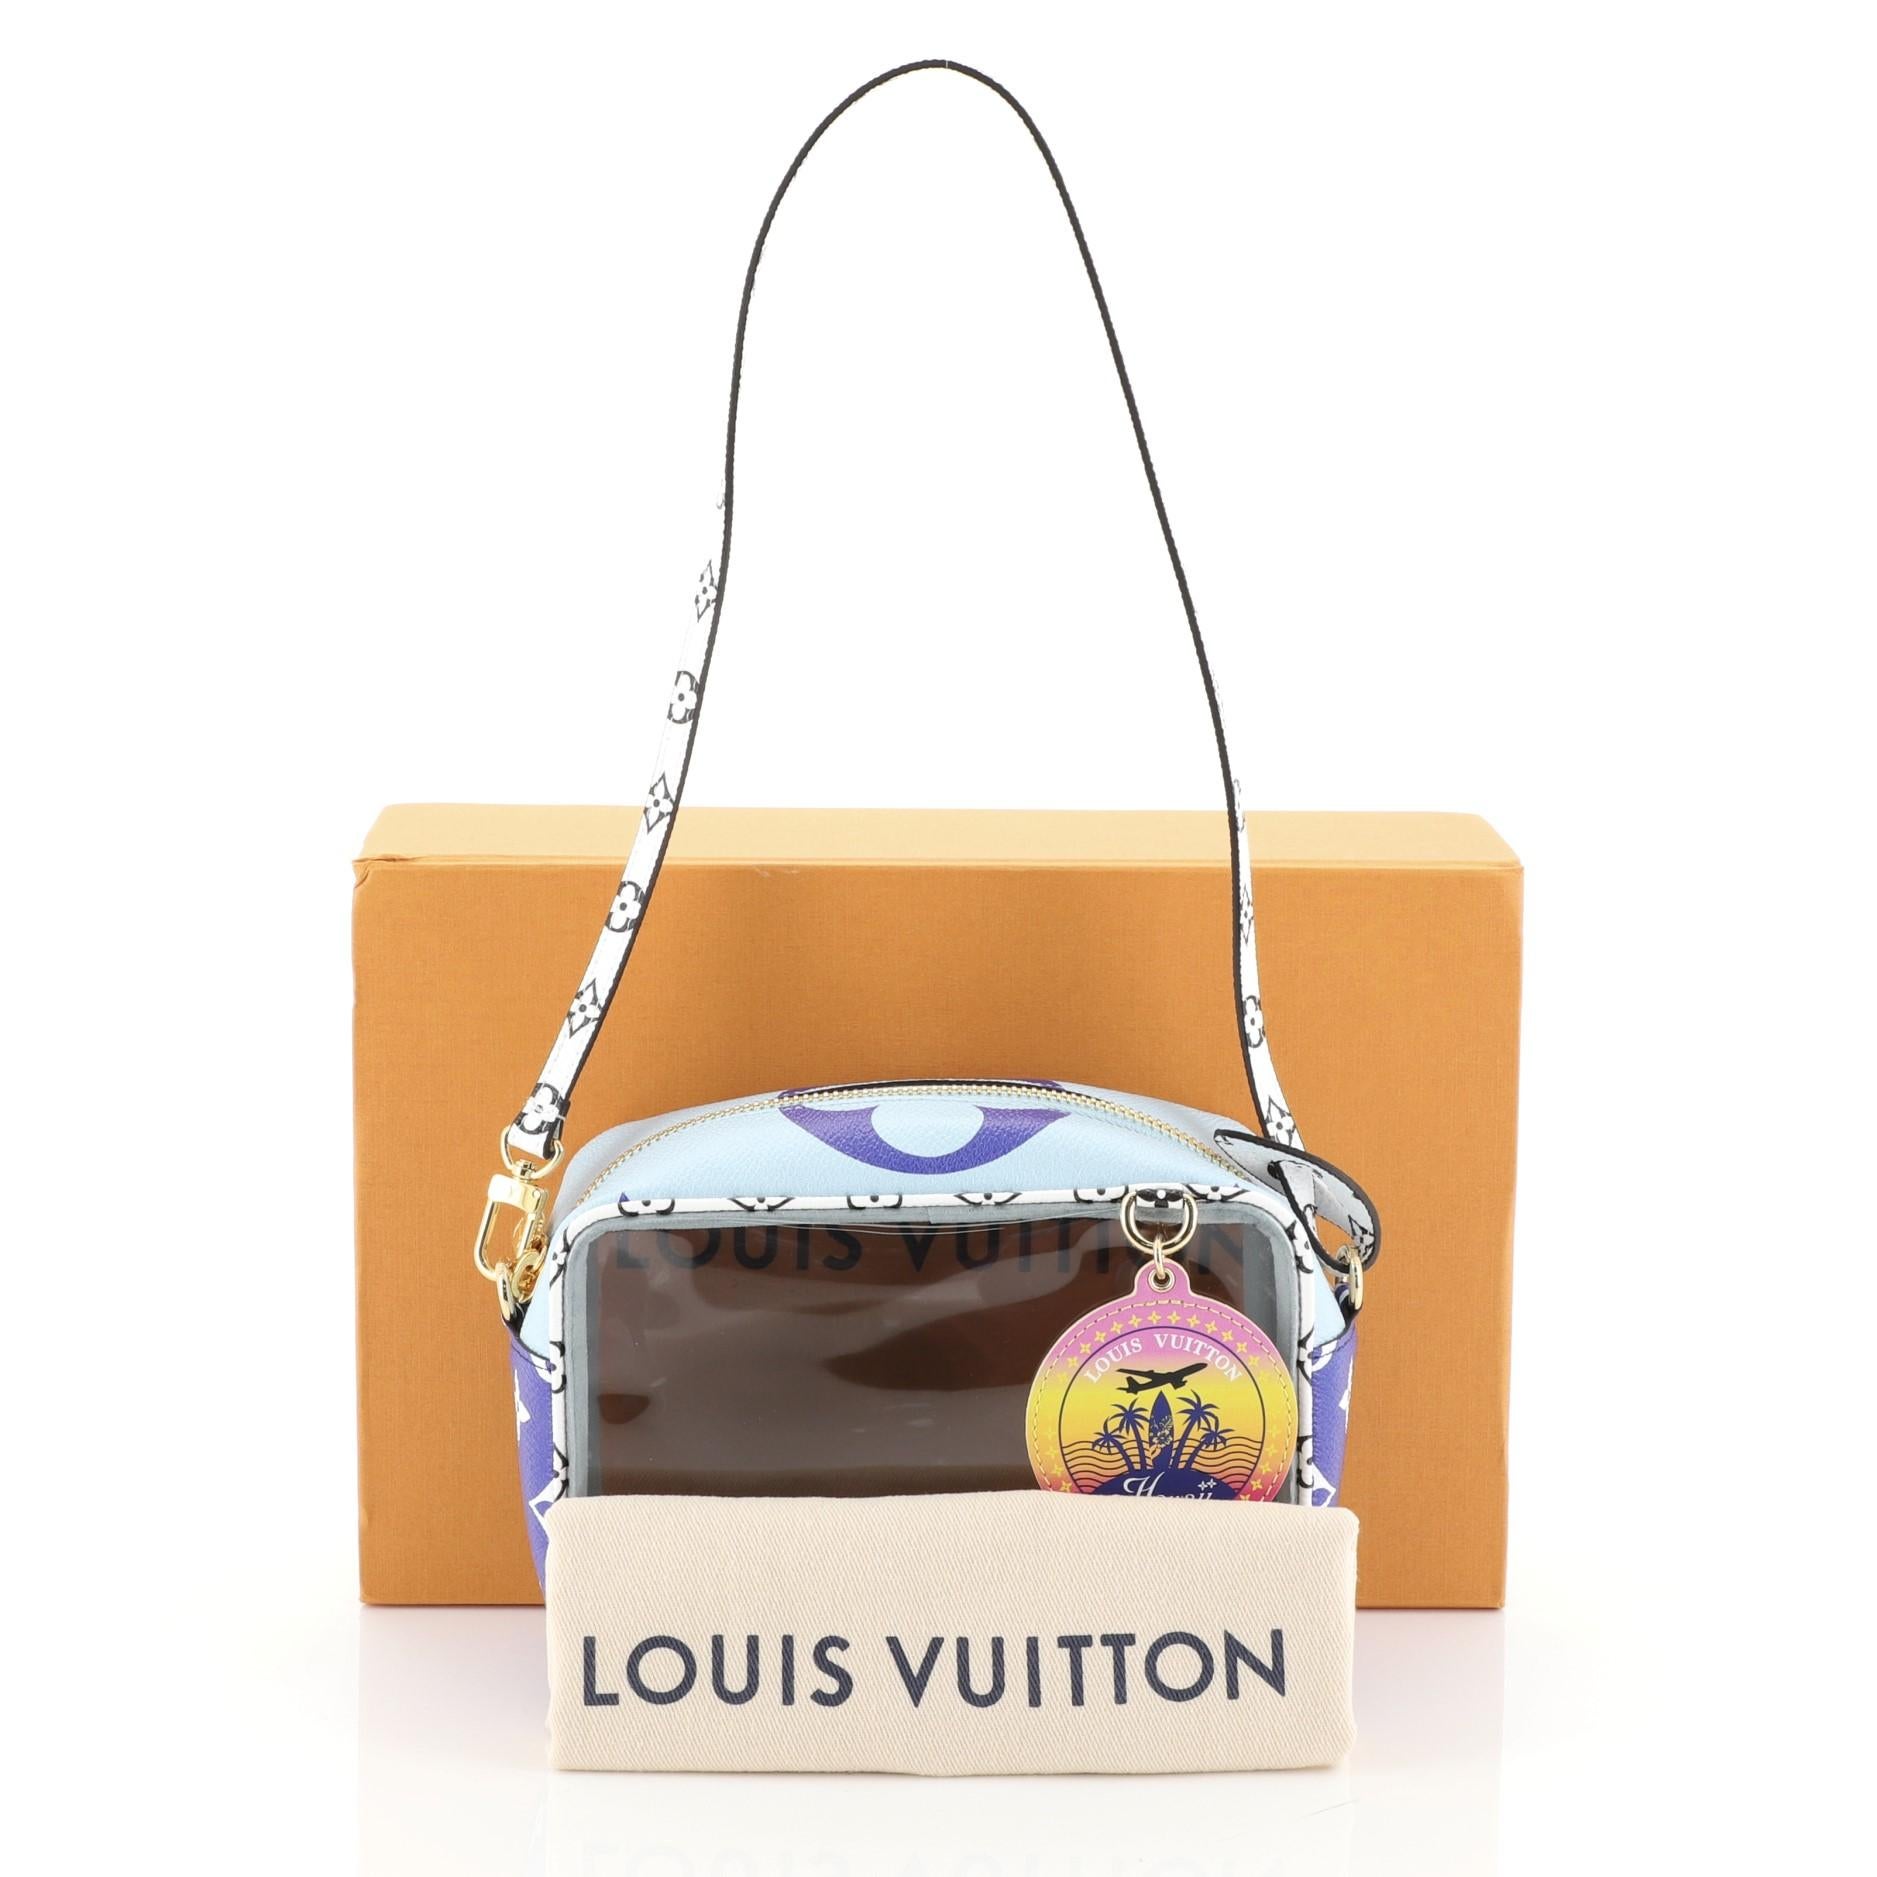 This Louis Vuitton Beach Pouch Limited Edition Cities Colored Monogram Giant, crafted from blue monogram coated canvas and PVC, features a flat top handle and gold-tone hardware. Its zip closure opens to a blue microfiber and PVC interior.